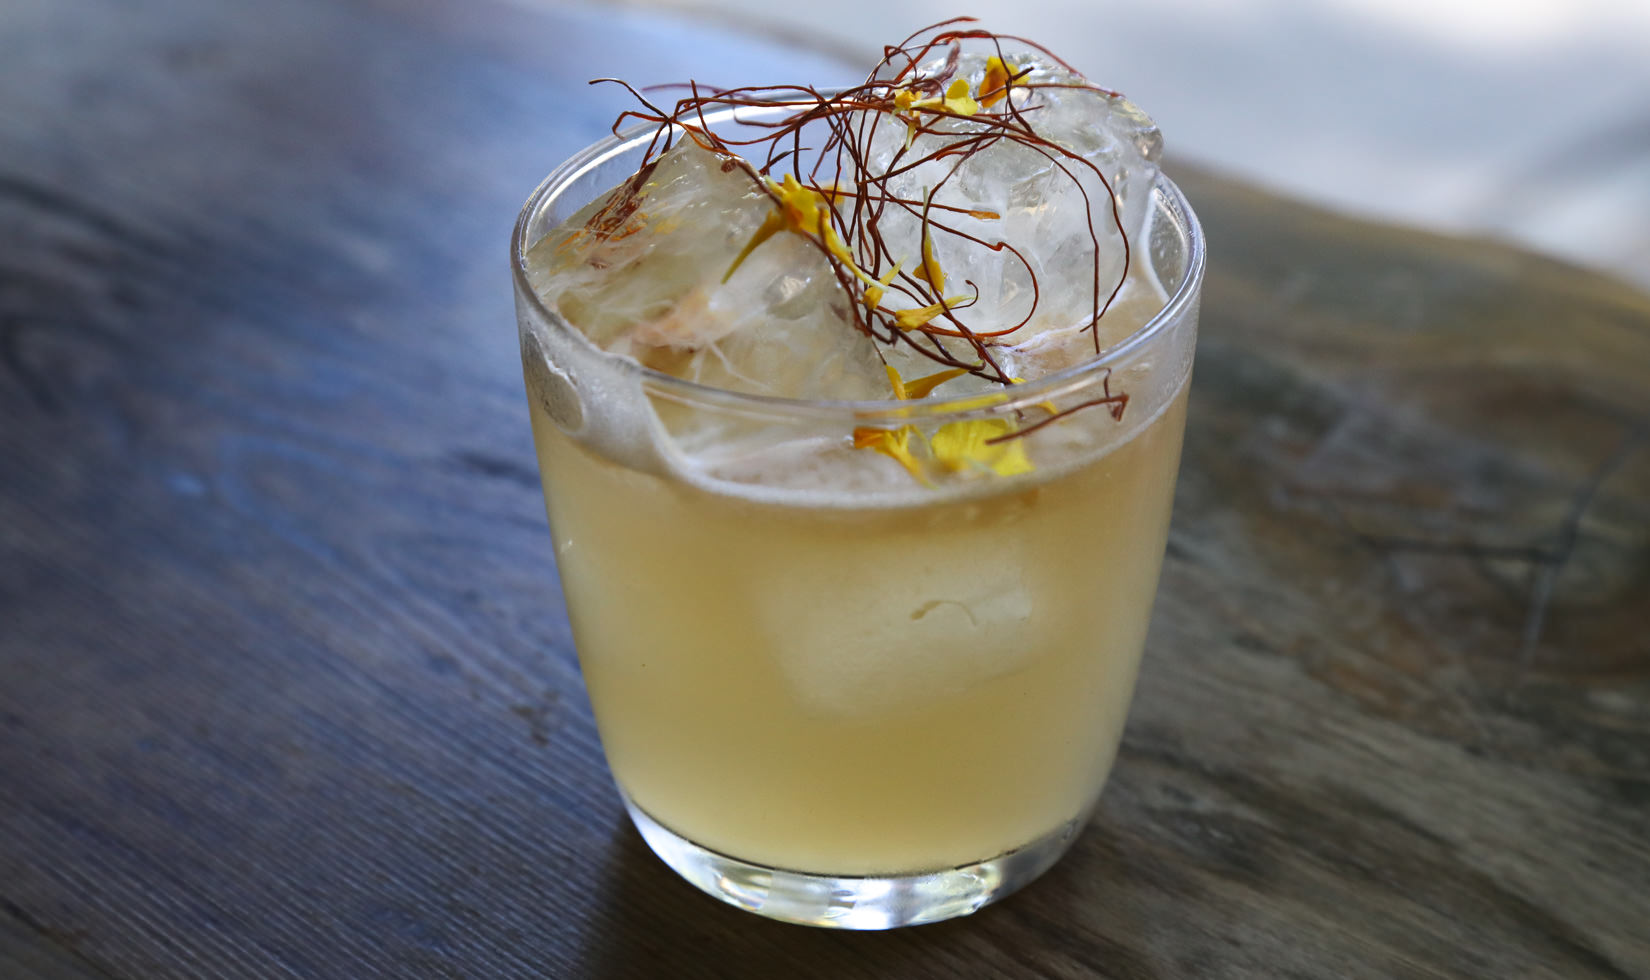 Game of Thrones cocktail recipe by Duke's Healdsburg, garnished with Calabrian chiles